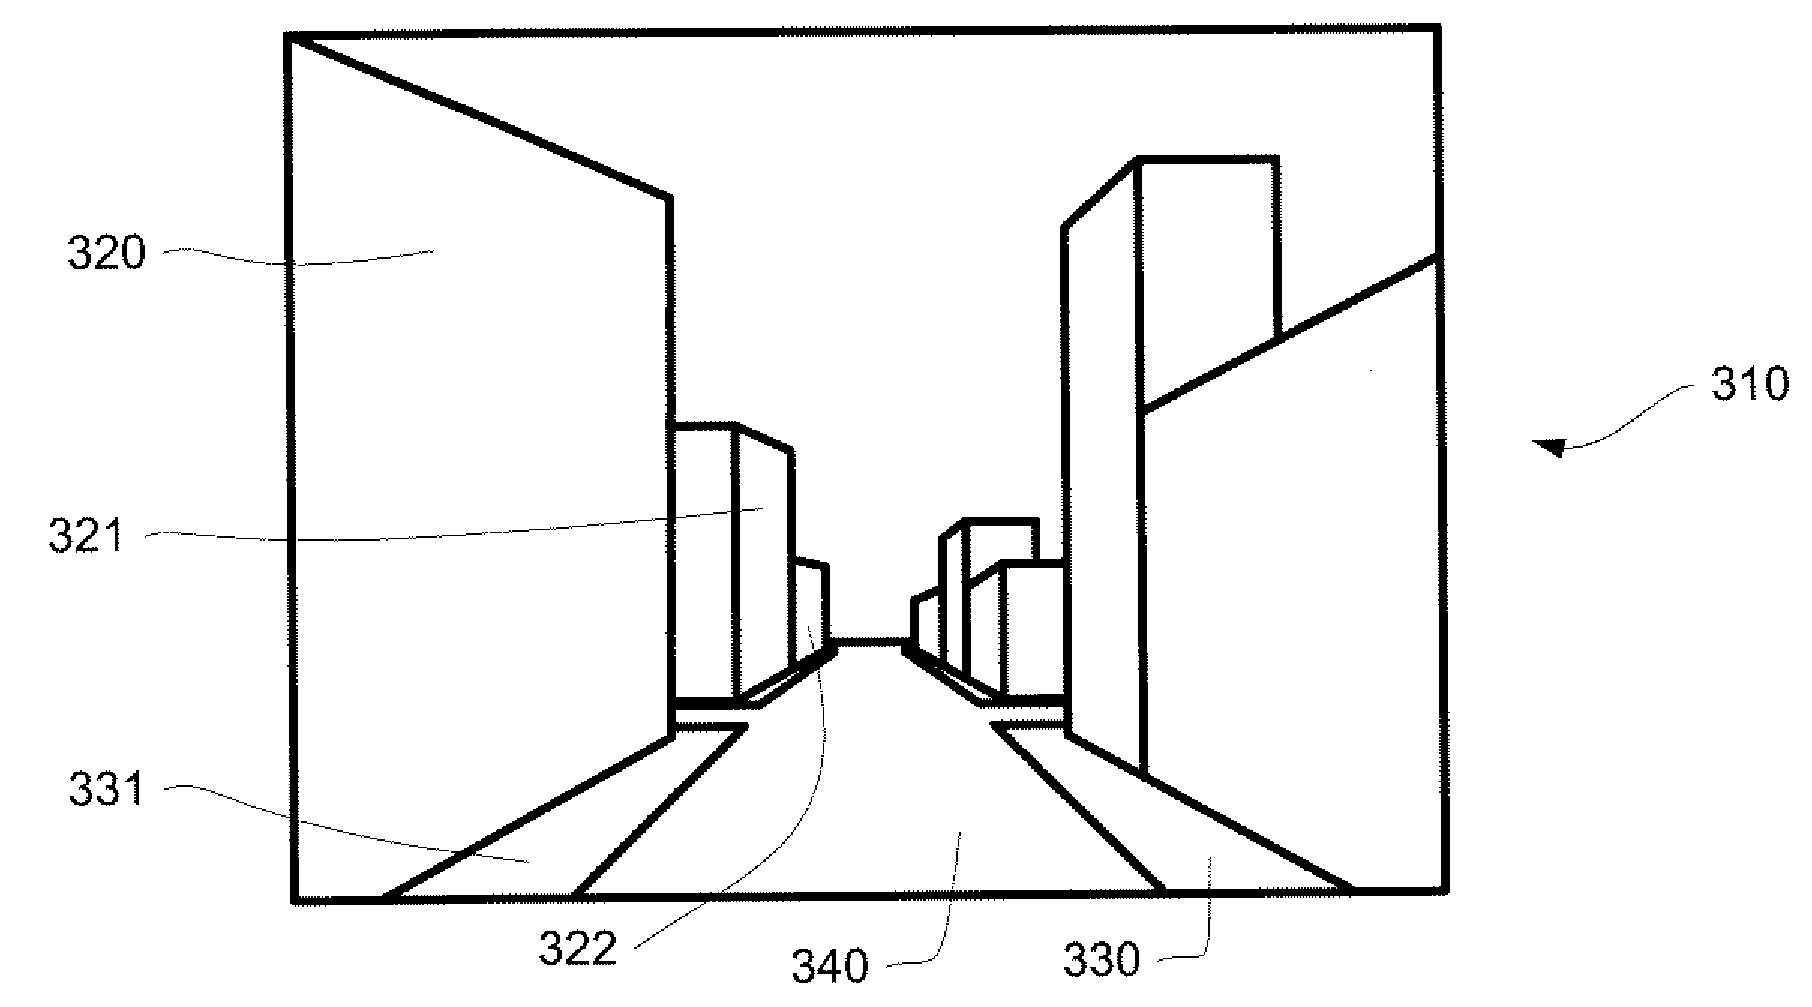 System and method of indicating transition between street level images